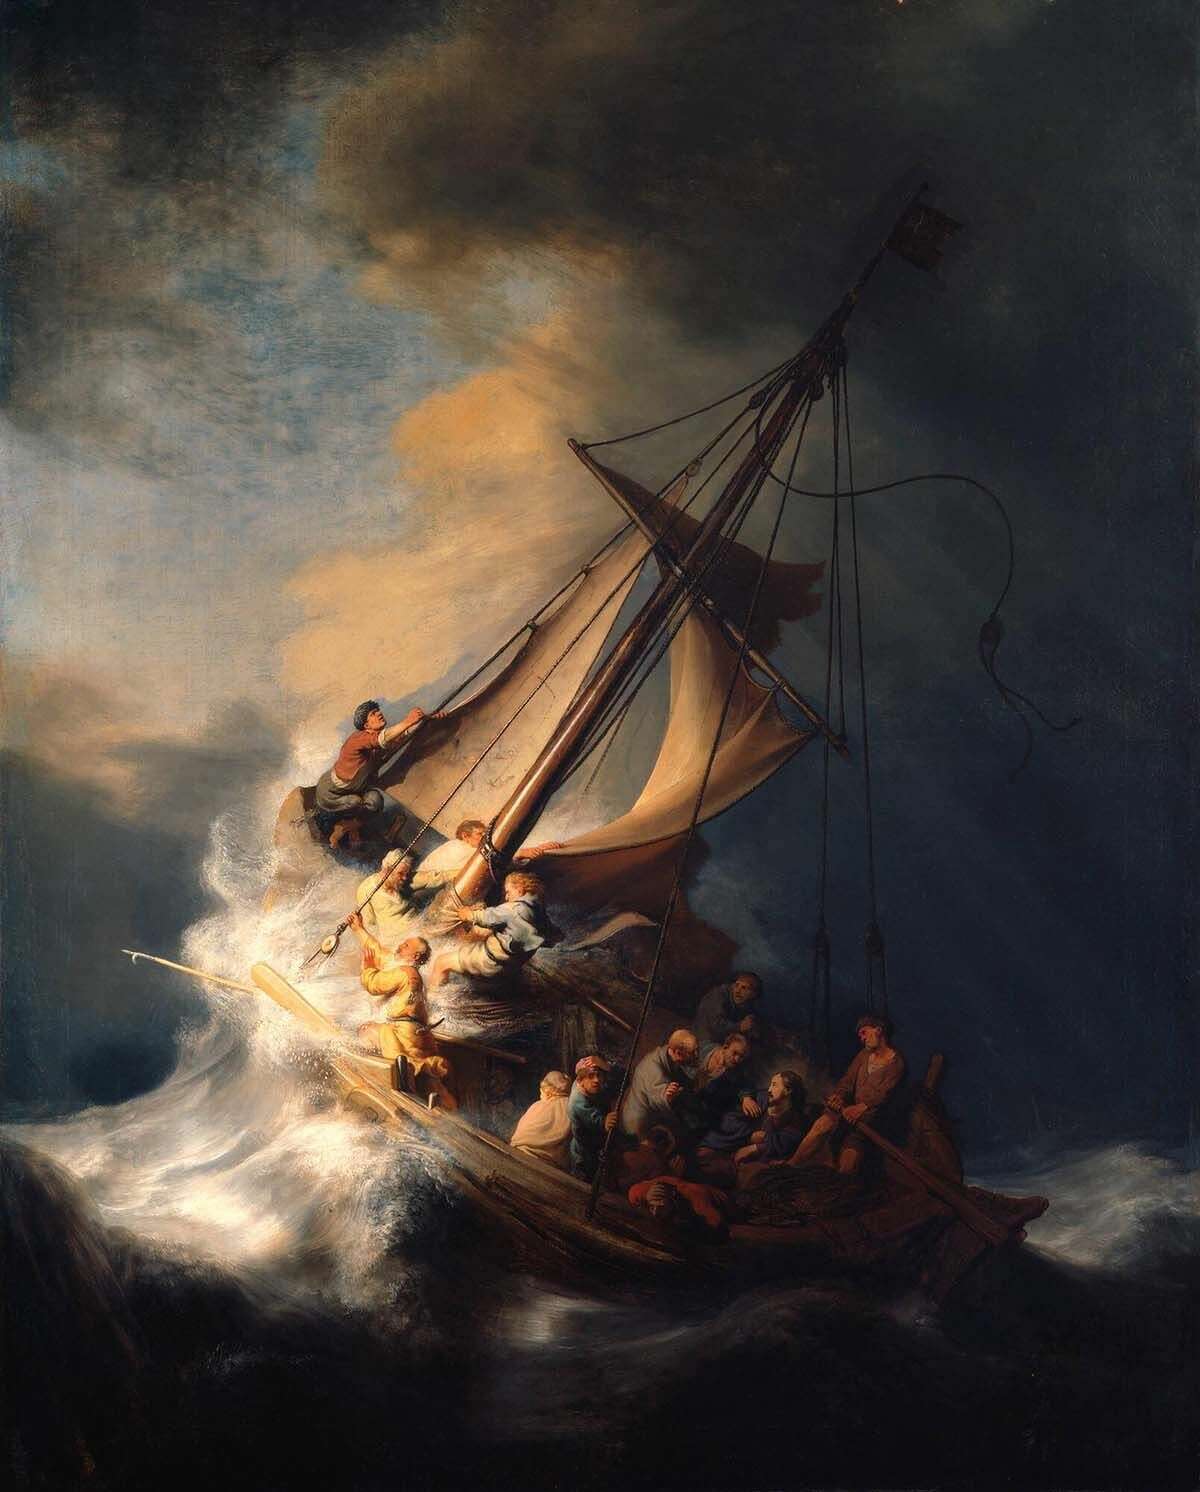 Rembrandt’s 1633 Christ in the Storm on the Sea of Galilee is one of 13 paintings stolen in 1990 from the Isabella Stewart Gardner Museum in Boston.